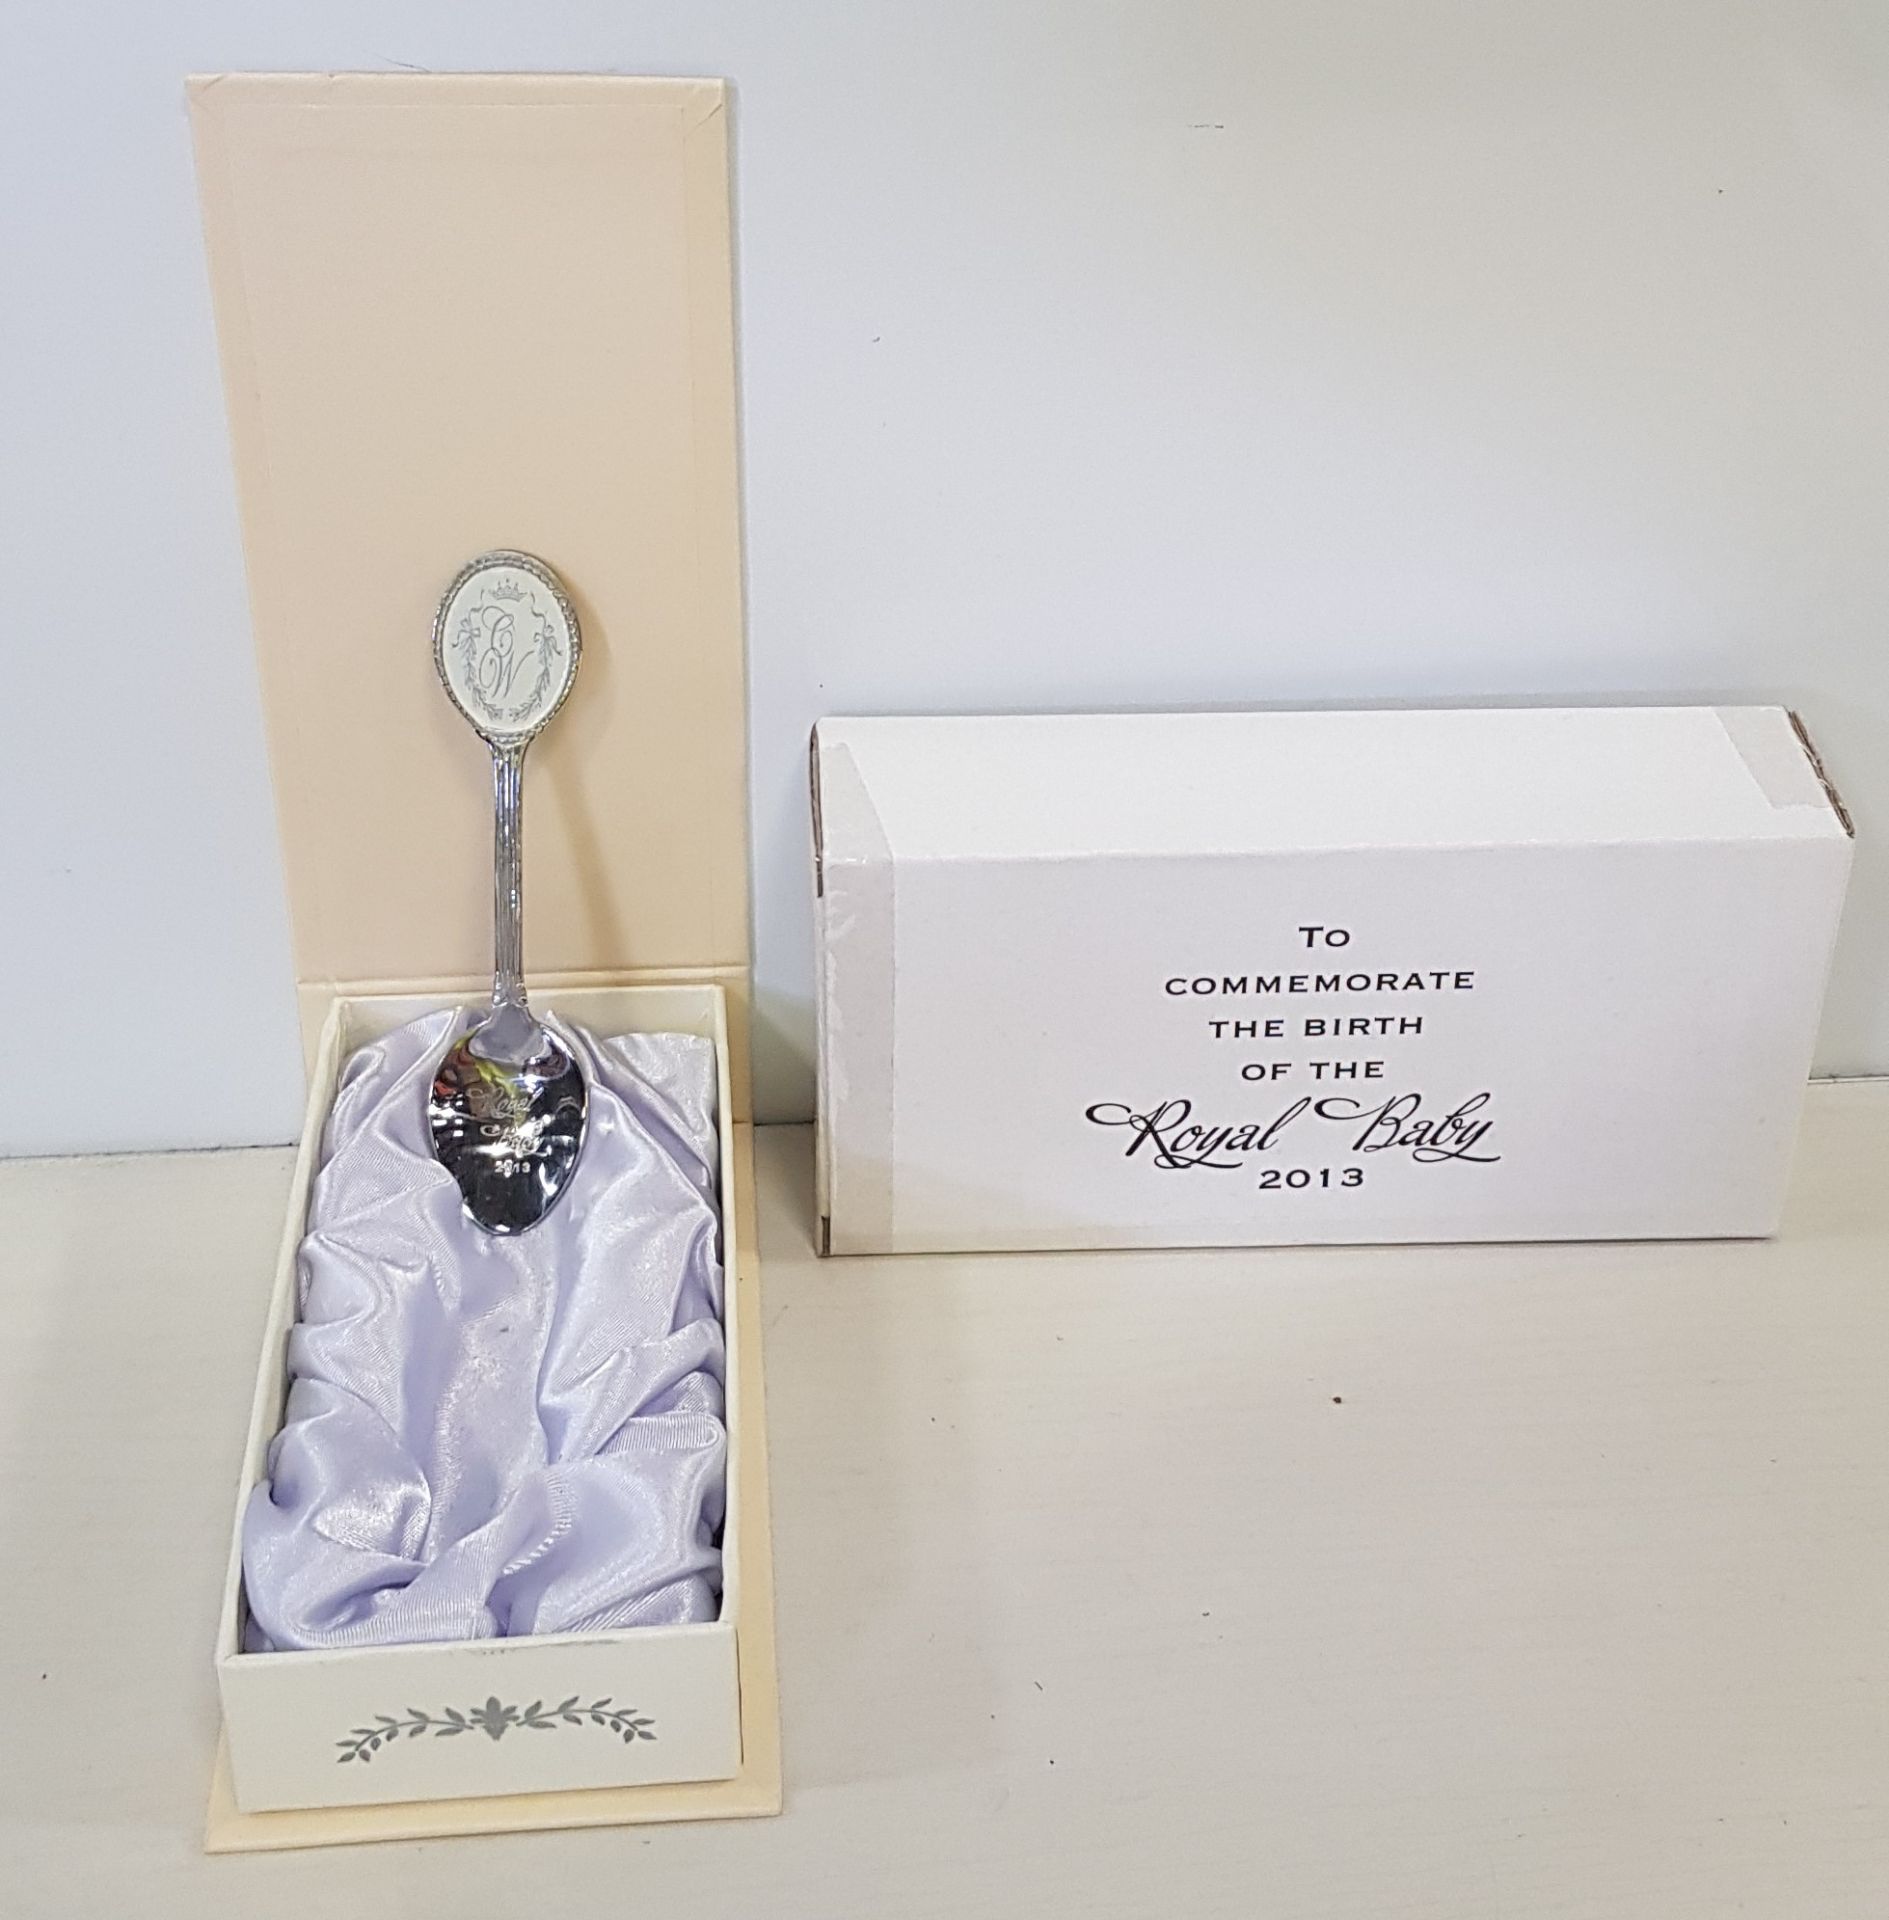 360 X BRAND NEW ROYAL BABY SPOON ( 2013 ) - IN 5 BOXES